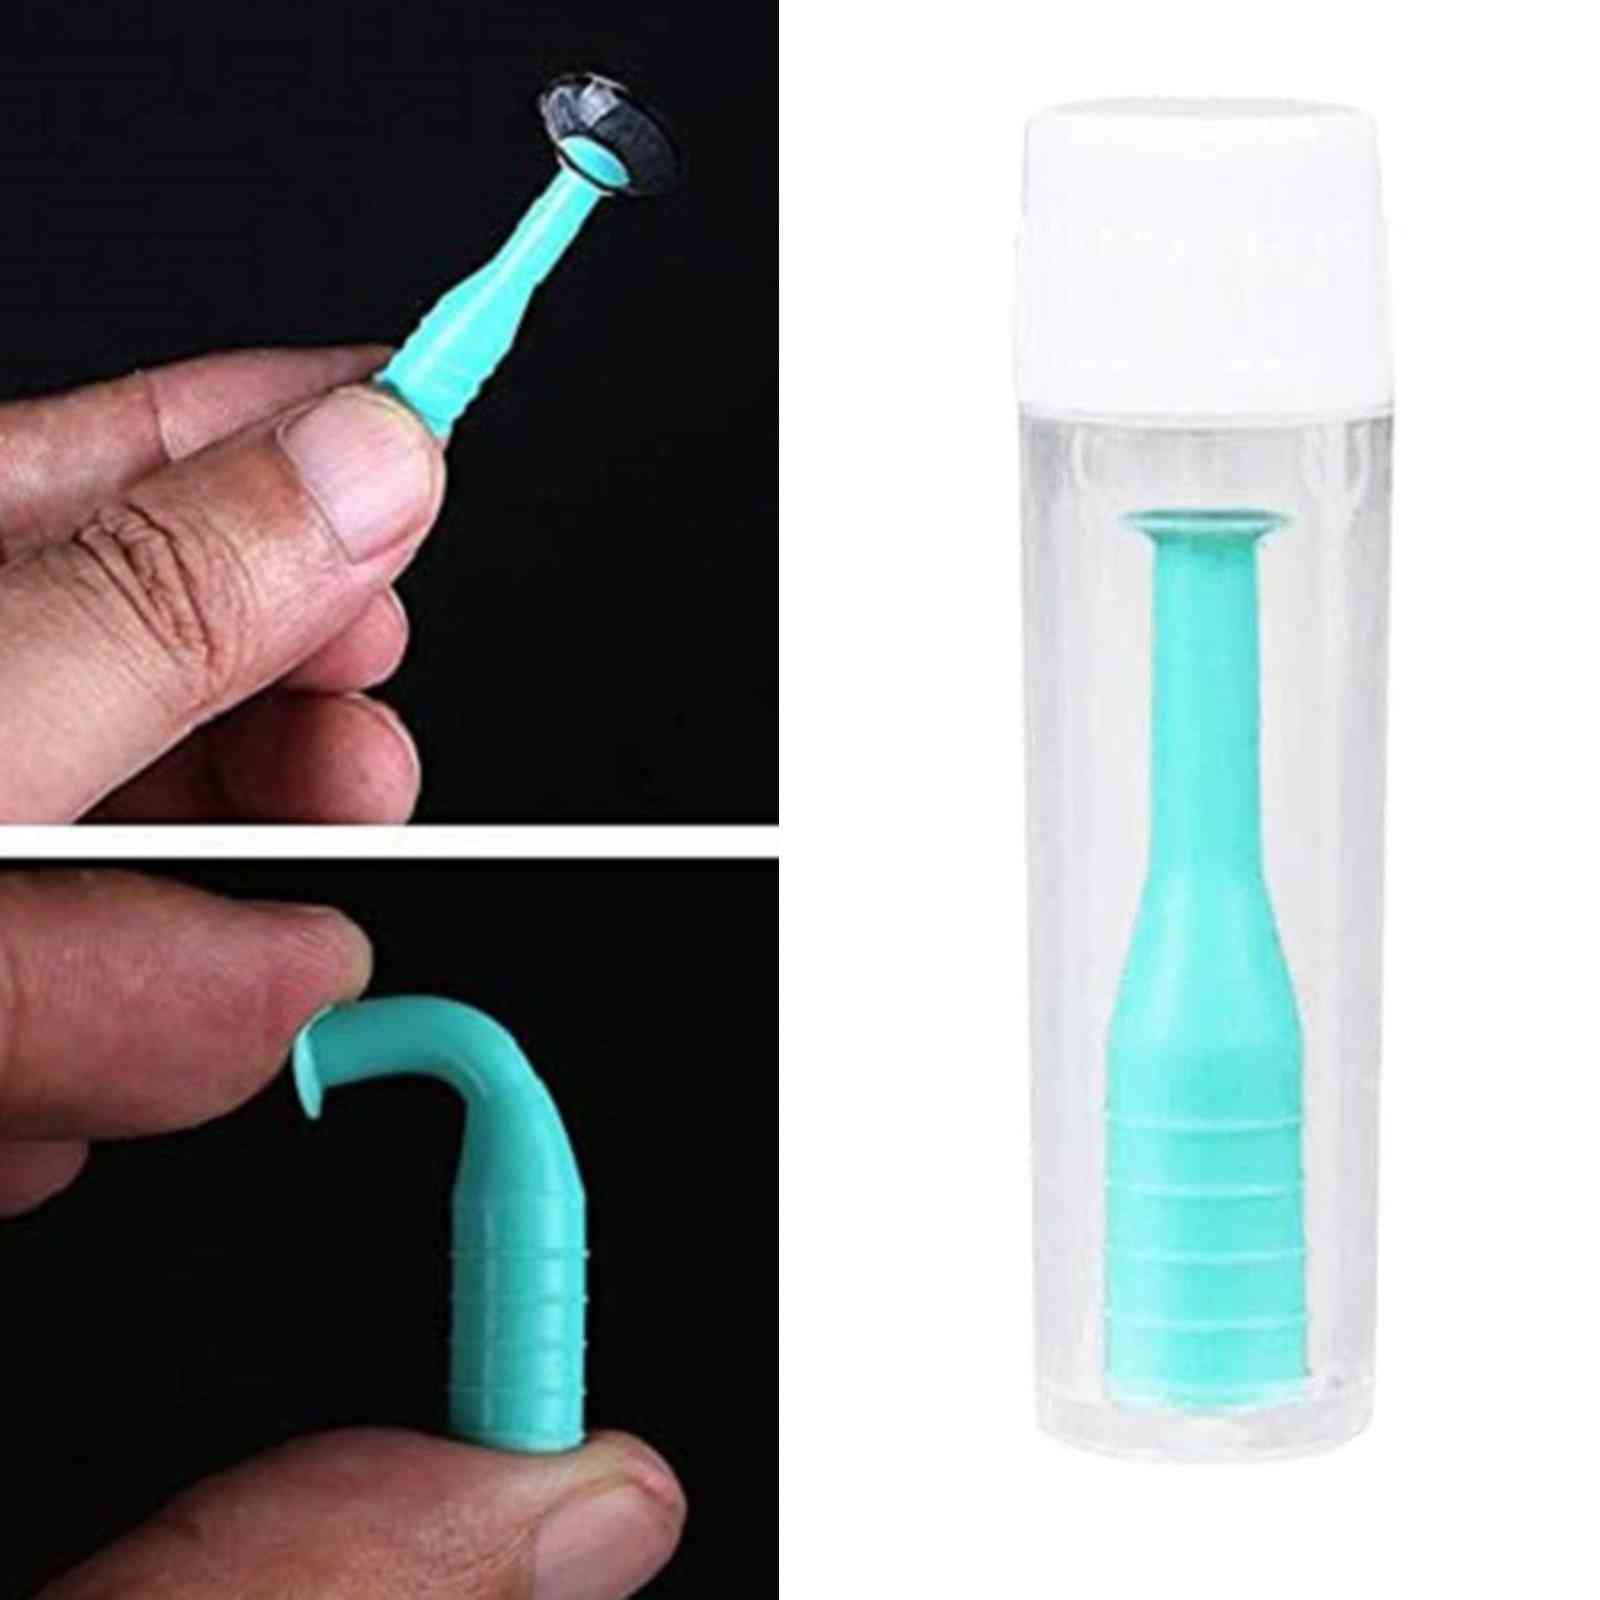 Hard Contact Lens Remover Insertion Tool